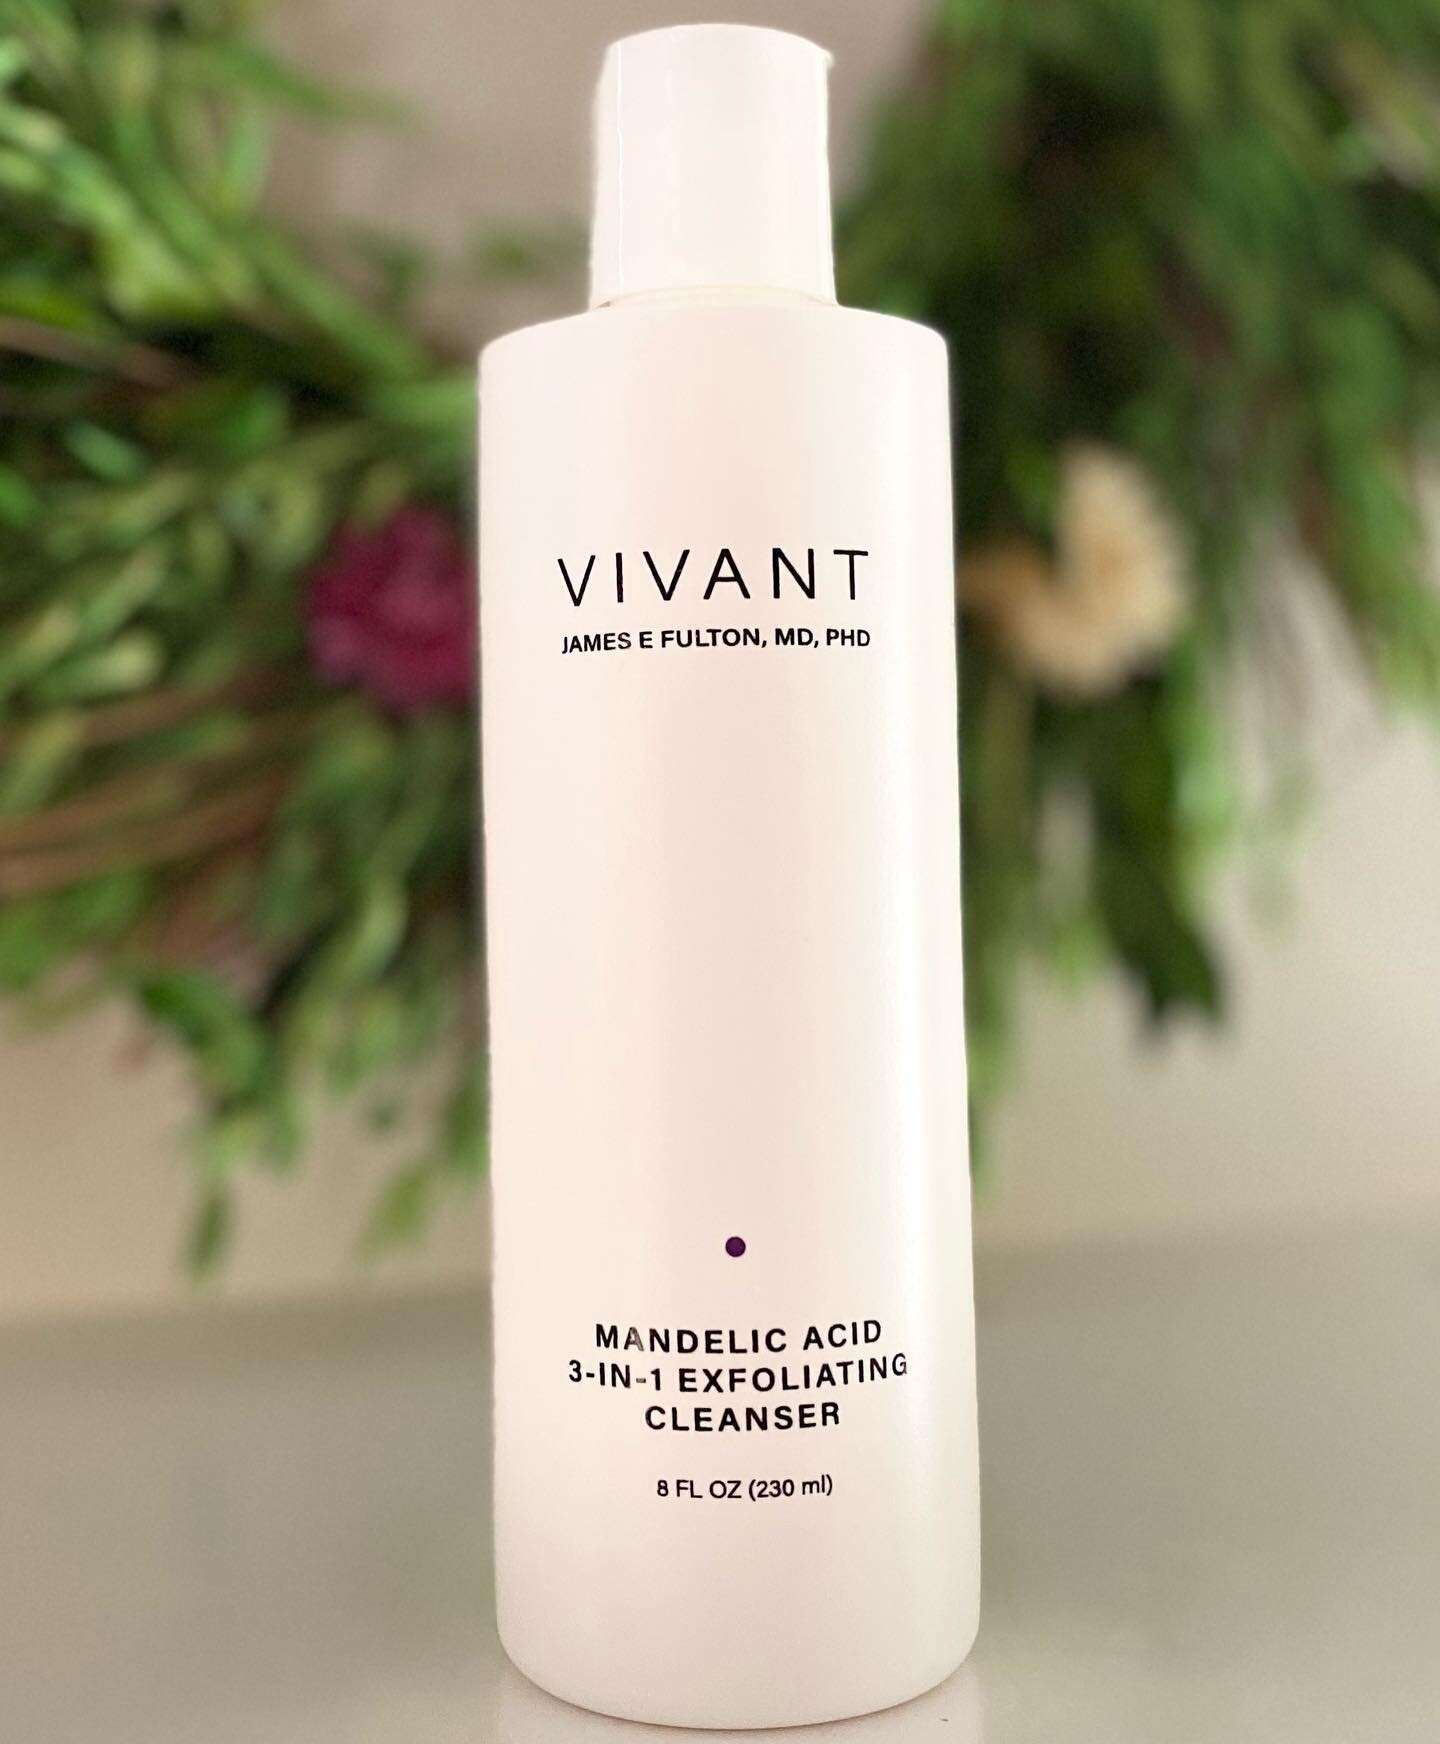 Hands down, favourite cleanser of all time. 

Vivant&rsquo;s Mandelic Acid 3-in-1 Exfoliating Cleanser has just the perfect amount of scrub and the magic of mandelic acid, green tea extract, grape seed oil, kiwi fruit extract, Vitamin C and honey. 

